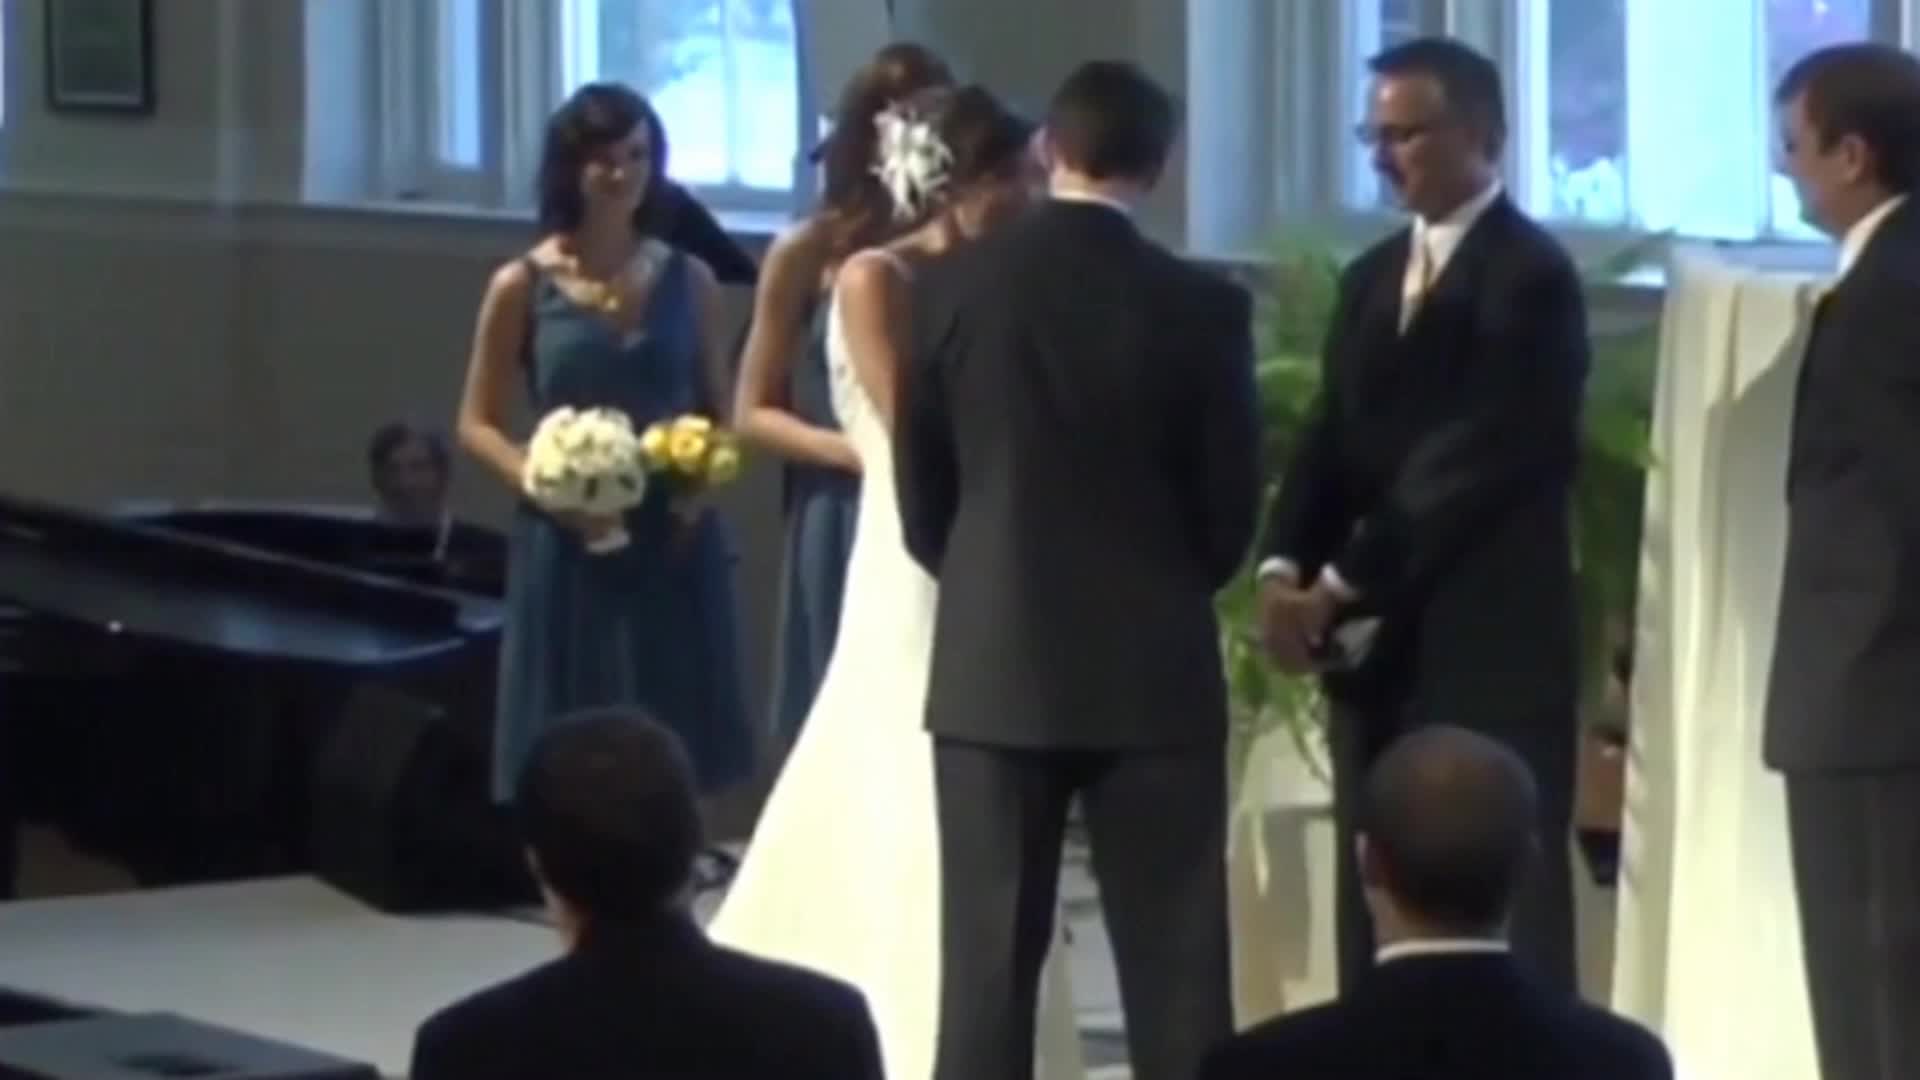 The whisper between the bride and groom was caught by the microphone.